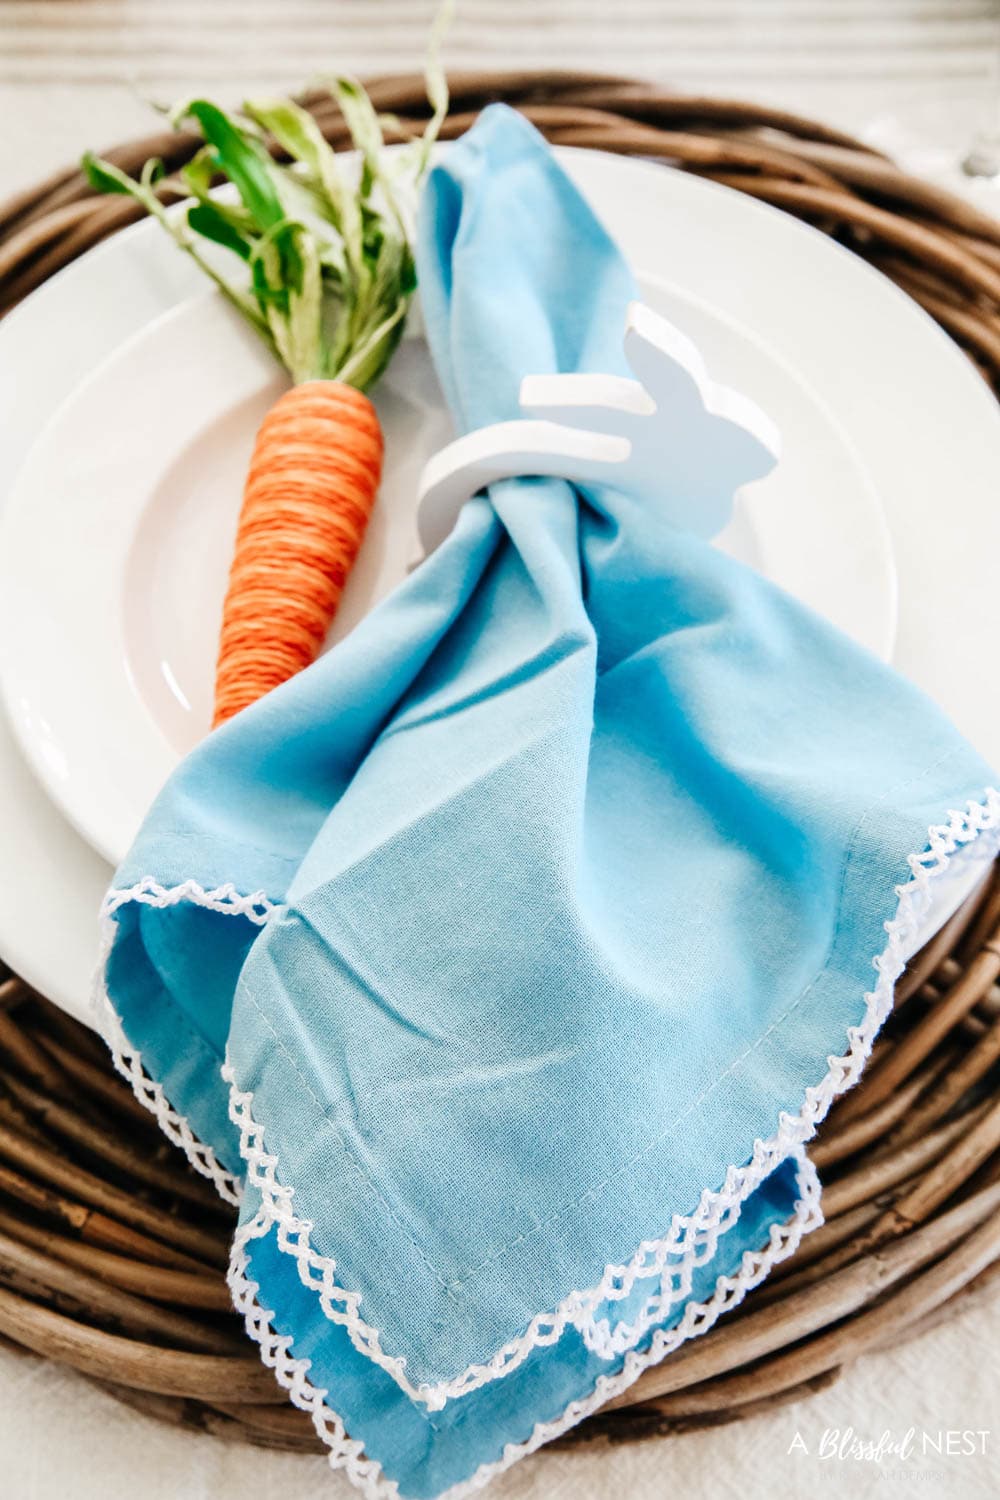 Blue cloth napkin tucked into a white wood bunny napkin holder and a jute carrot resting next to it on a white plate